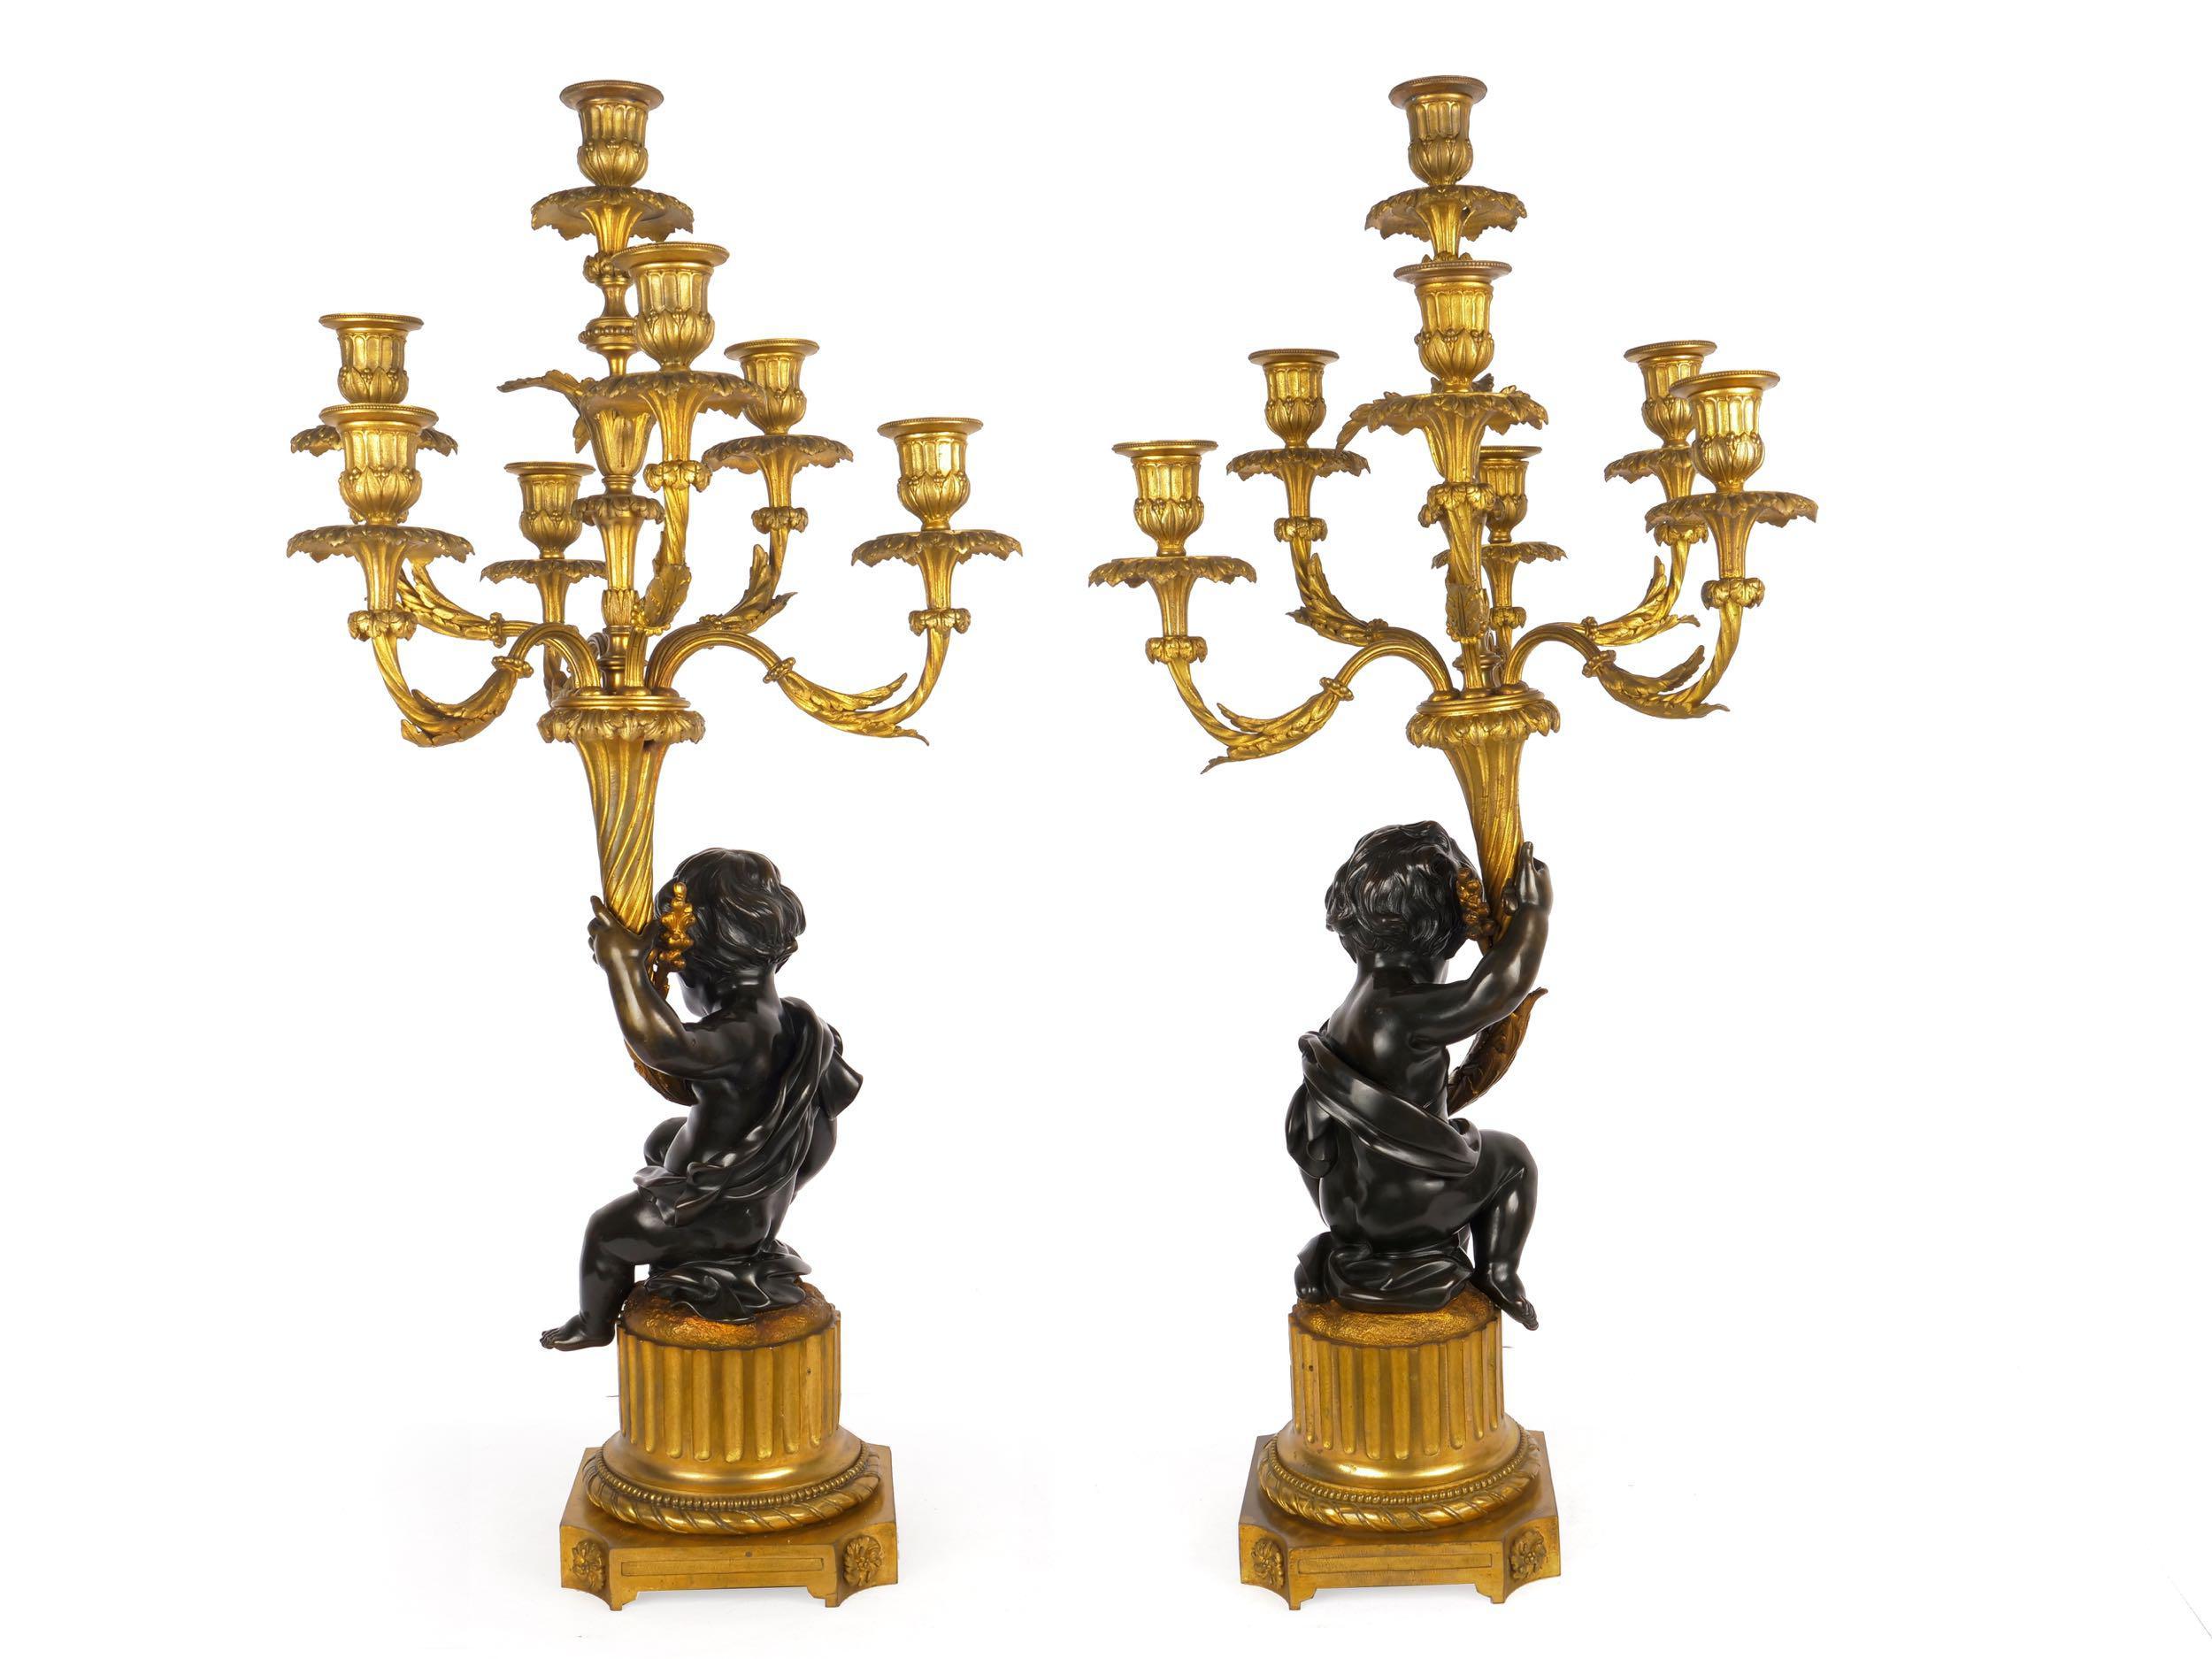 Pair of French Bronze Antique Putto Sculpture Candelabra Lamps, circa 1870-1890 In Good Condition For Sale In Shippensburg, PA